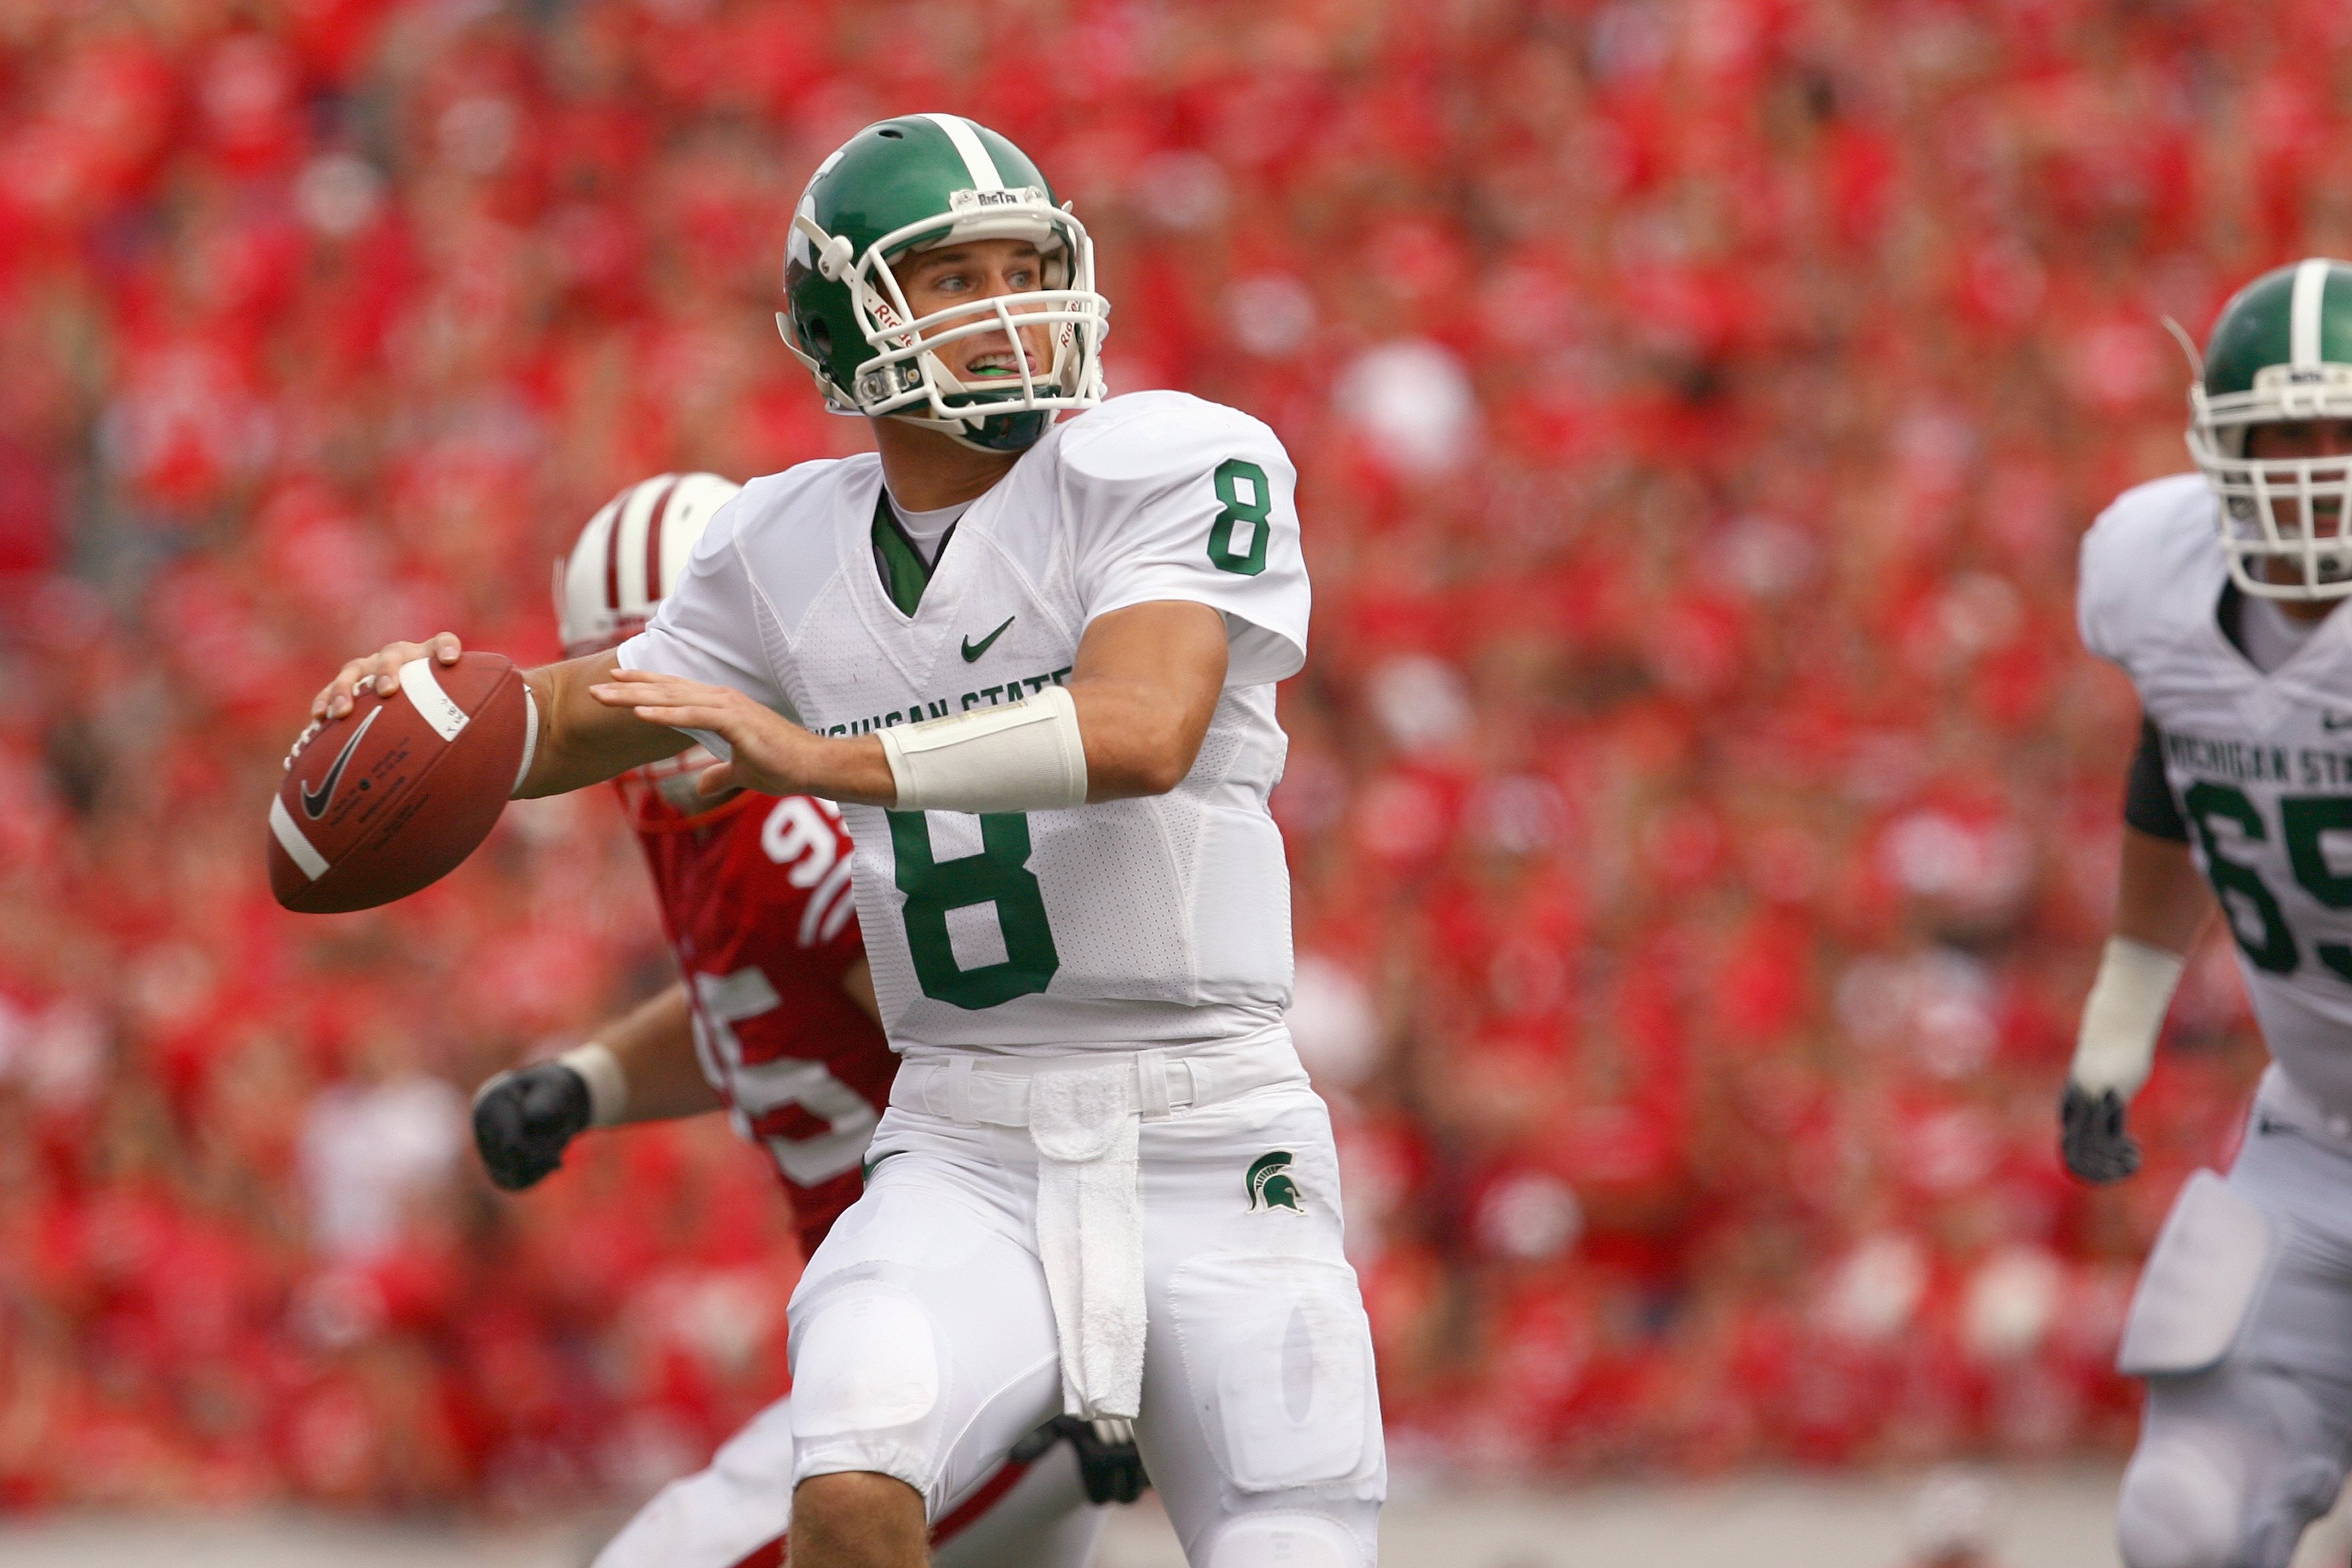 MADISON, WI - SEPTEMBER 26: Kirk Cousins #8 of the Michigan State Spartans looks to pass the ball against the Wisconsin Badgers on September 26, 2009 at Camp Randall Stadium in Madison, Wisconsin. (Photo by Jonathan Daniel/Getty Images)